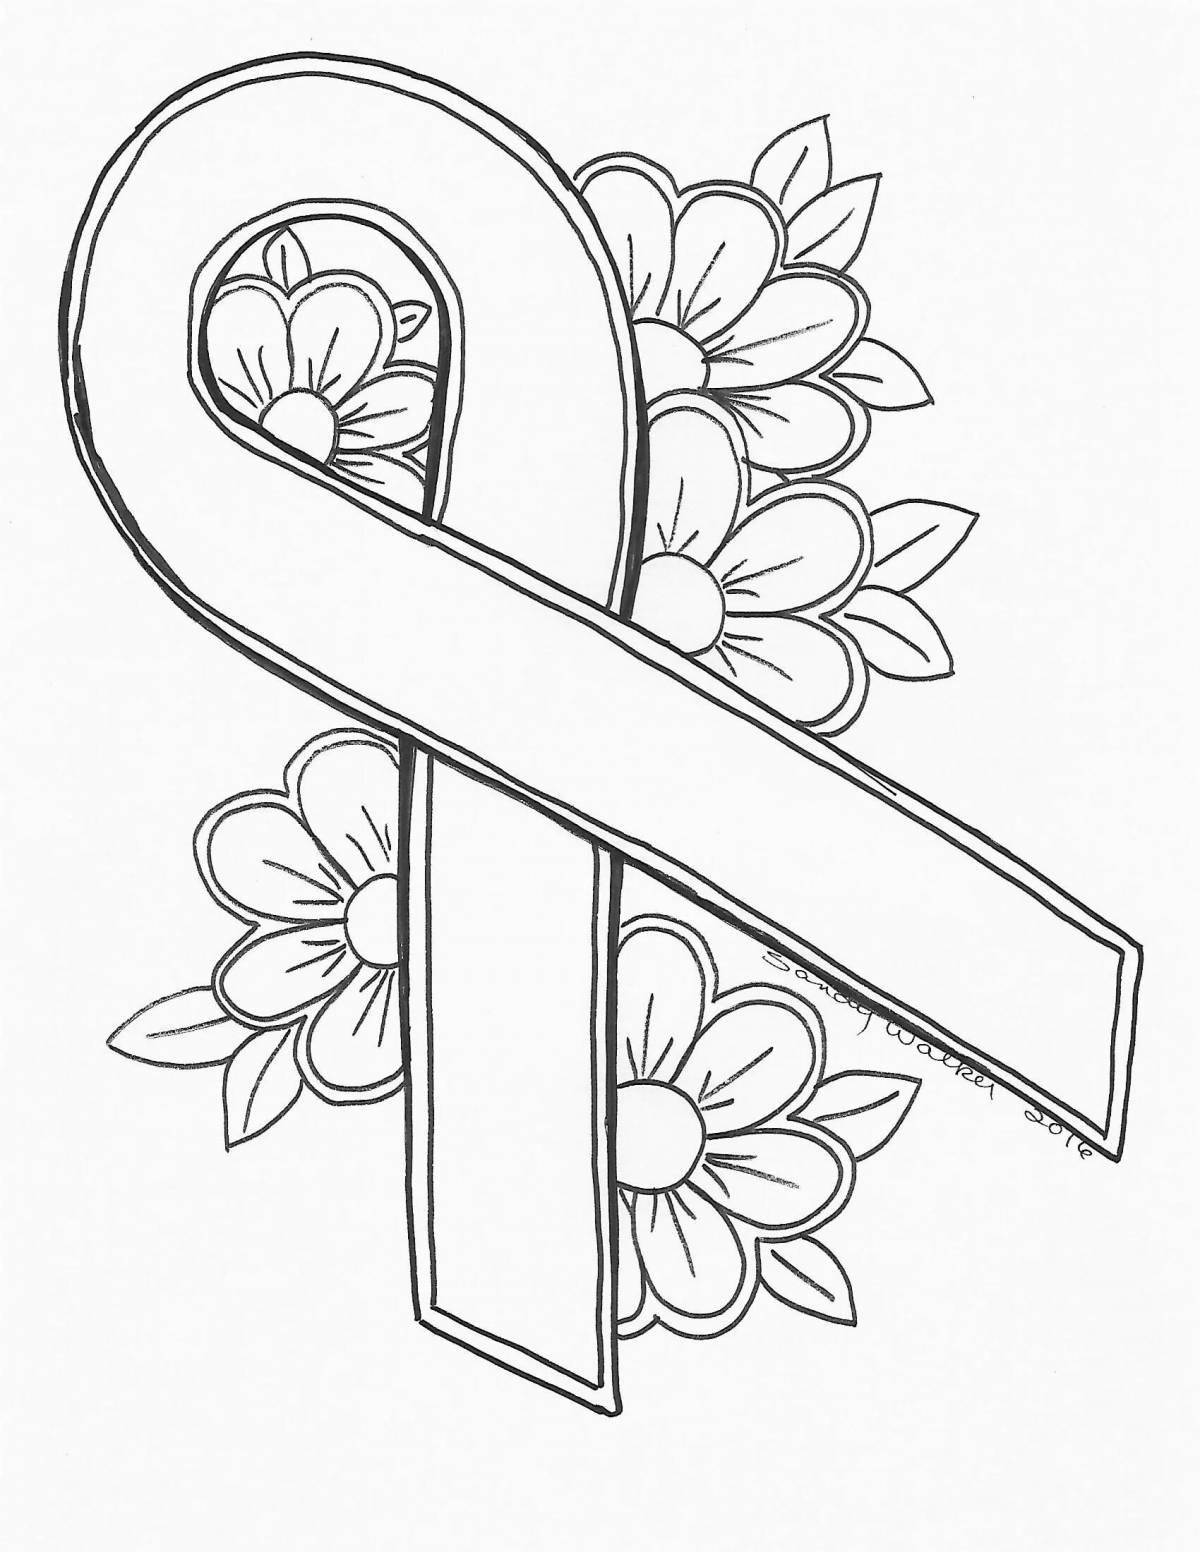 Colored St. George Ribbon coloring page for children